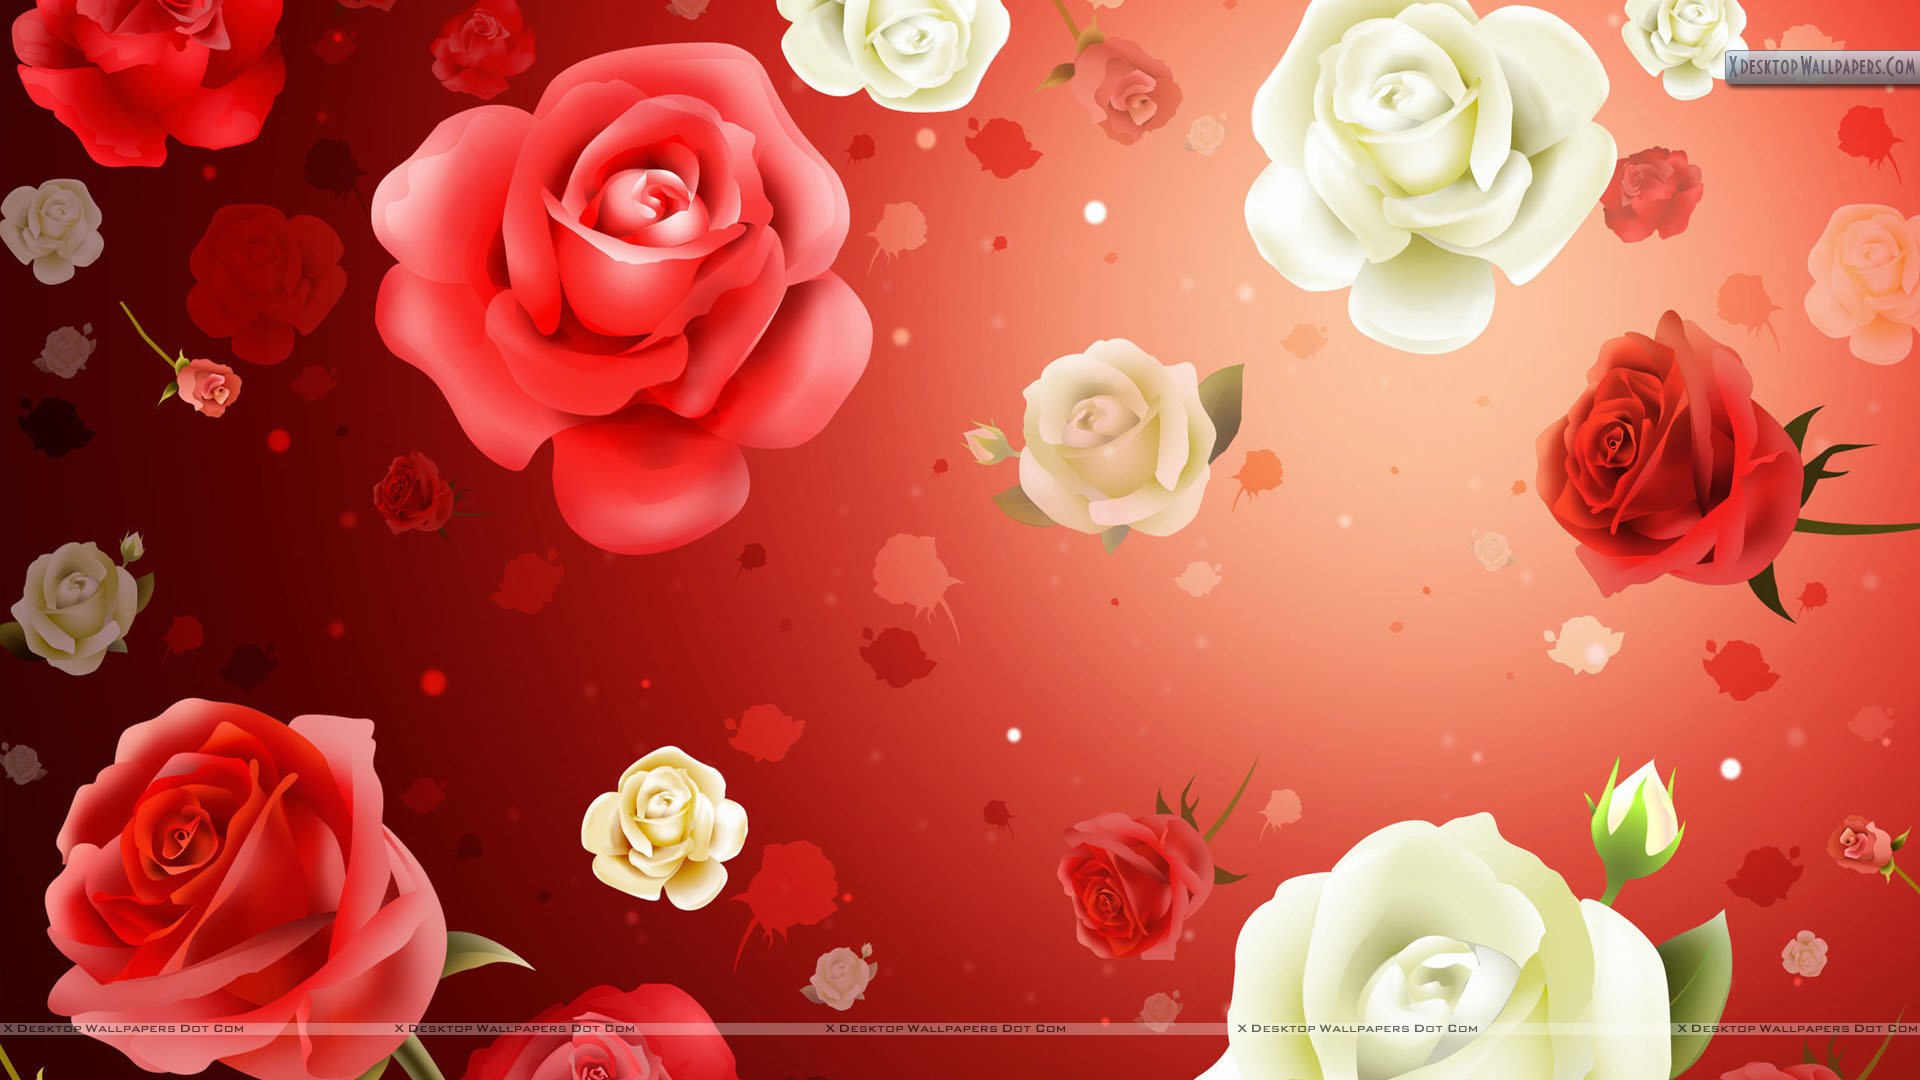 Free Download Valentines Flowers Wallpapers Wallpaper Other 1920x1080 1920x1080 For Your Desktop Mobile Tablet Explore 48 Valentine Flowers Wallpaper Heart Flower Wallpaper Valentine Roses Wallpaper